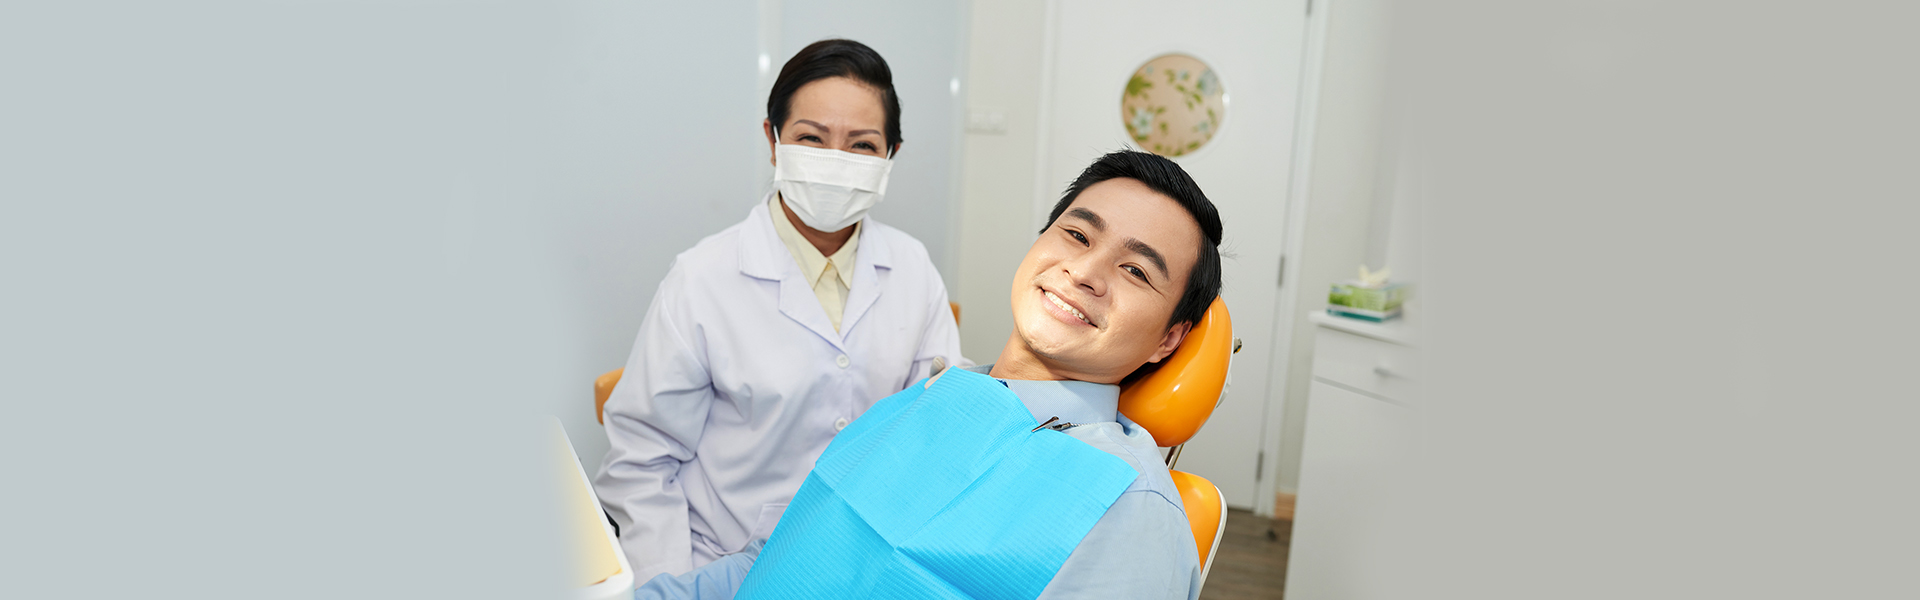 An Inside Look at the Benefits of Having Regular Dental Exams and Cleanings